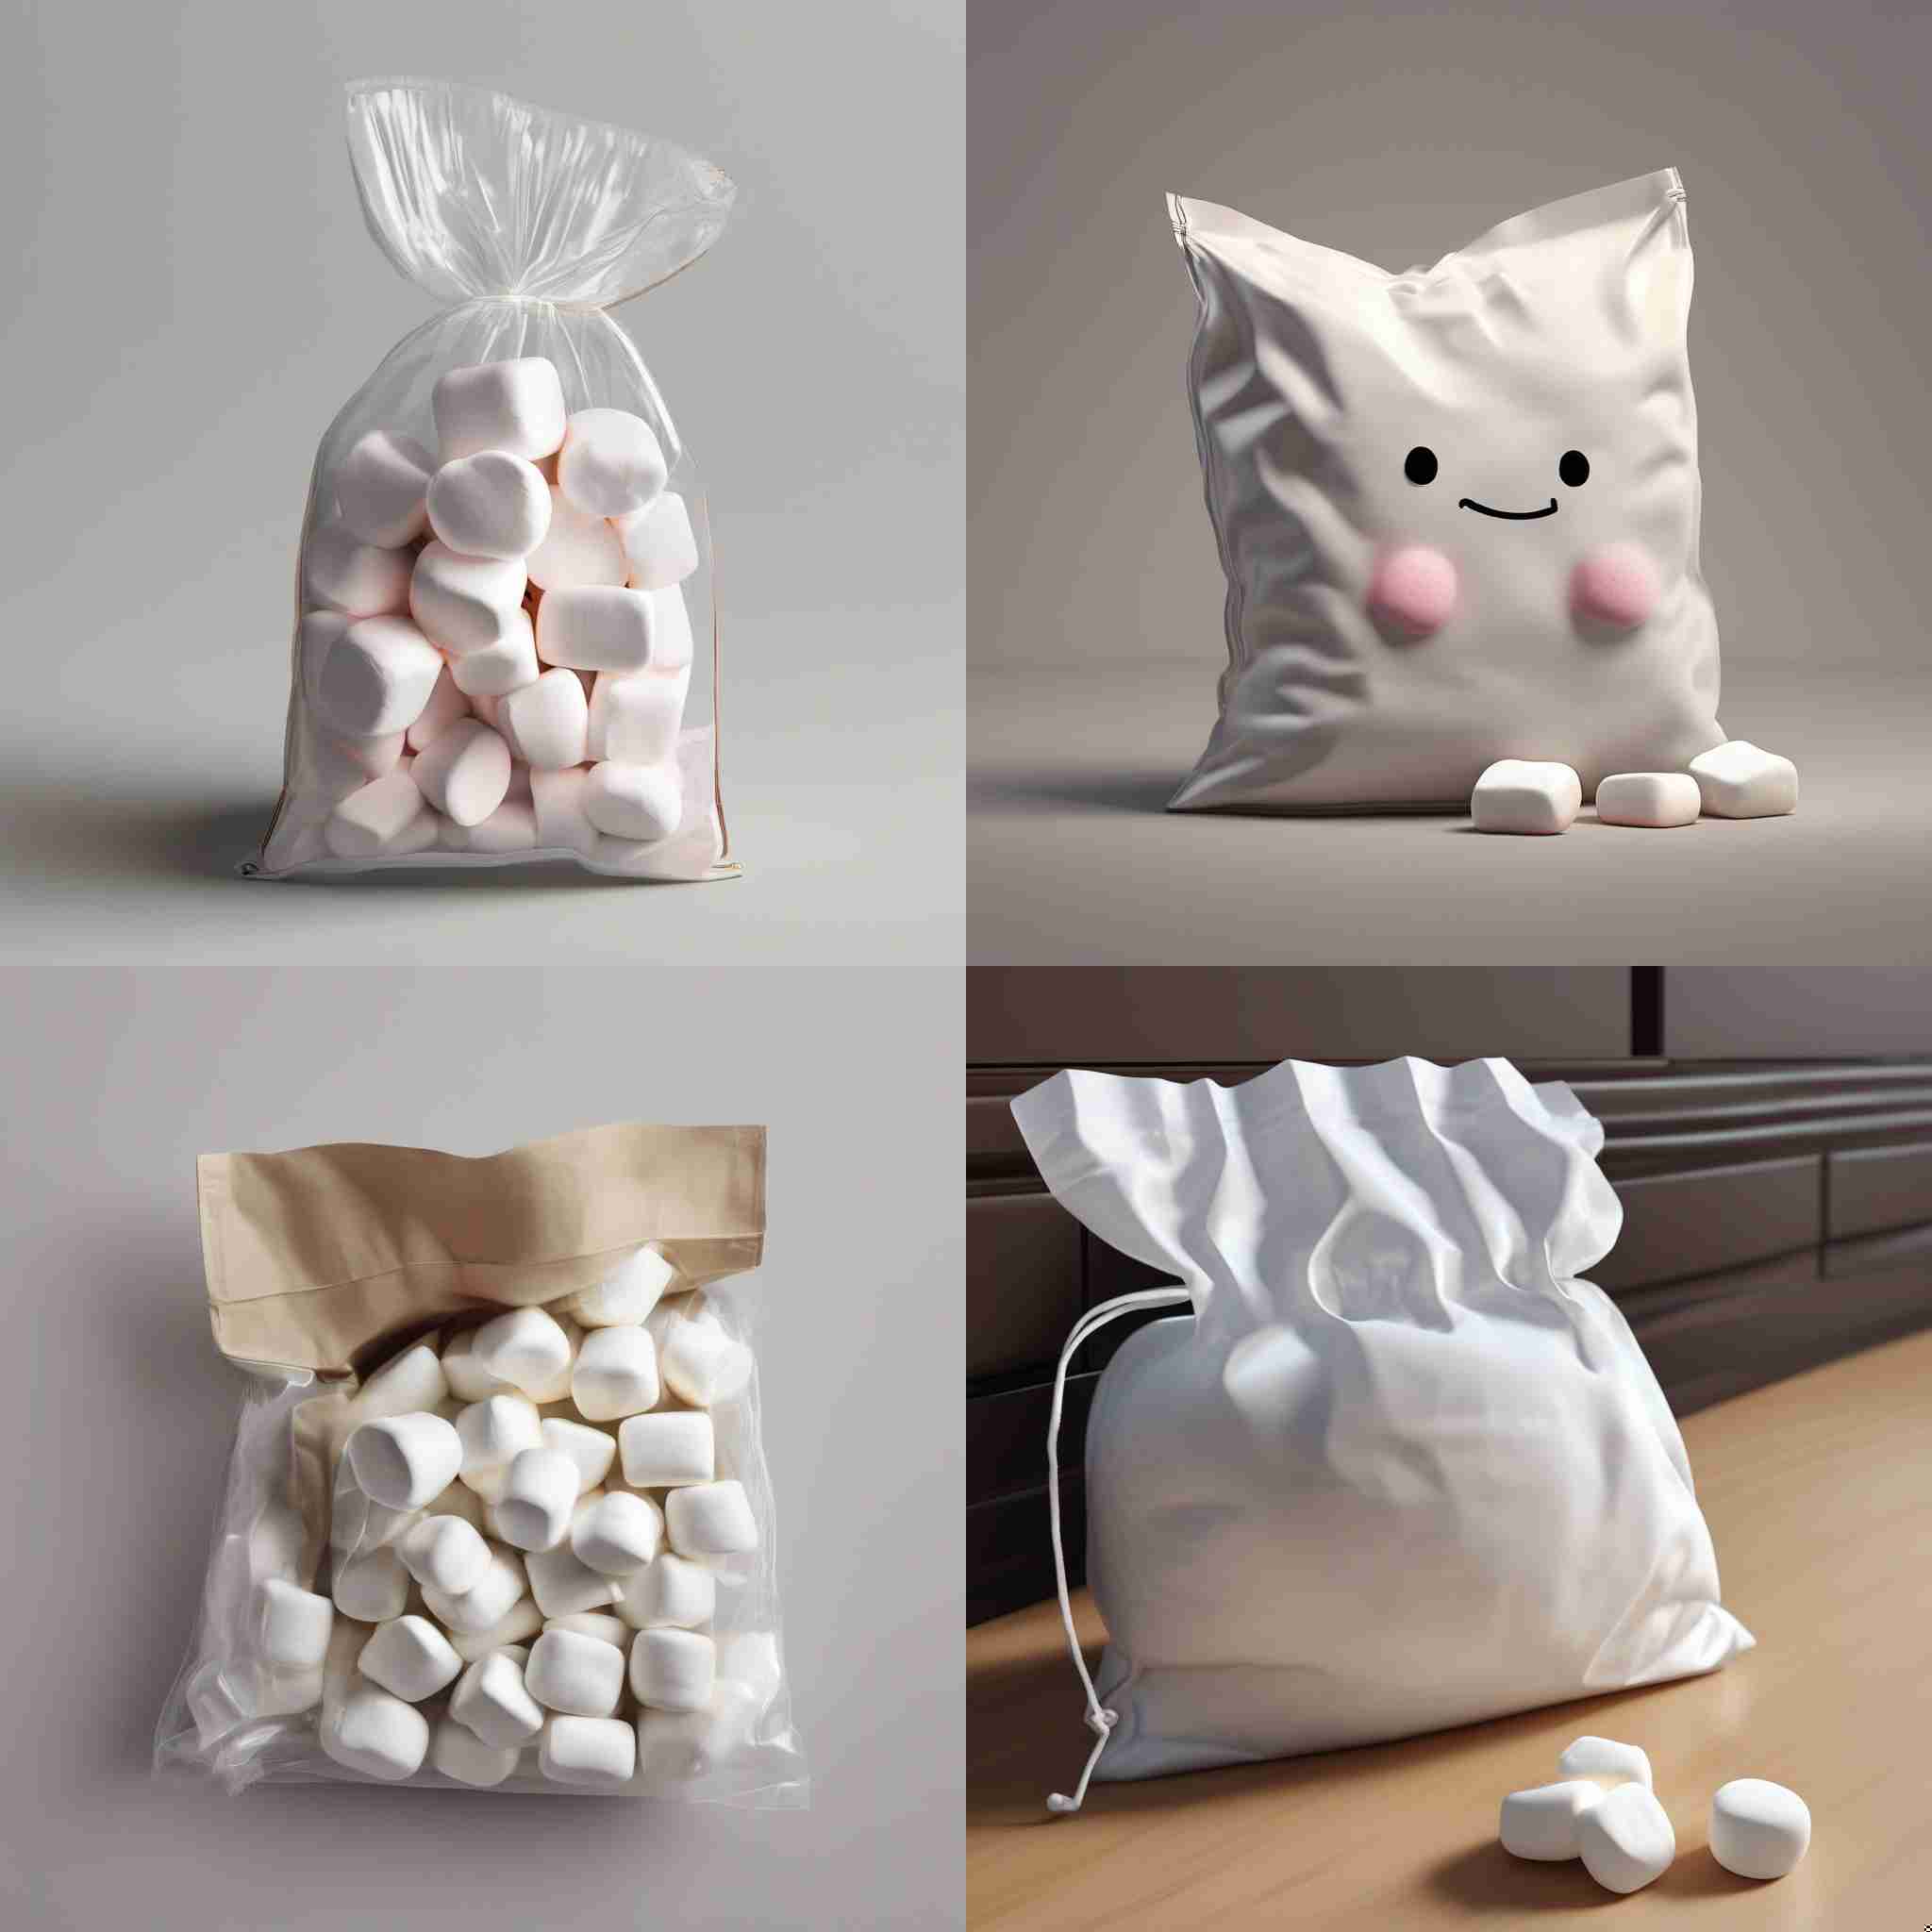 Marshmallow in a bag